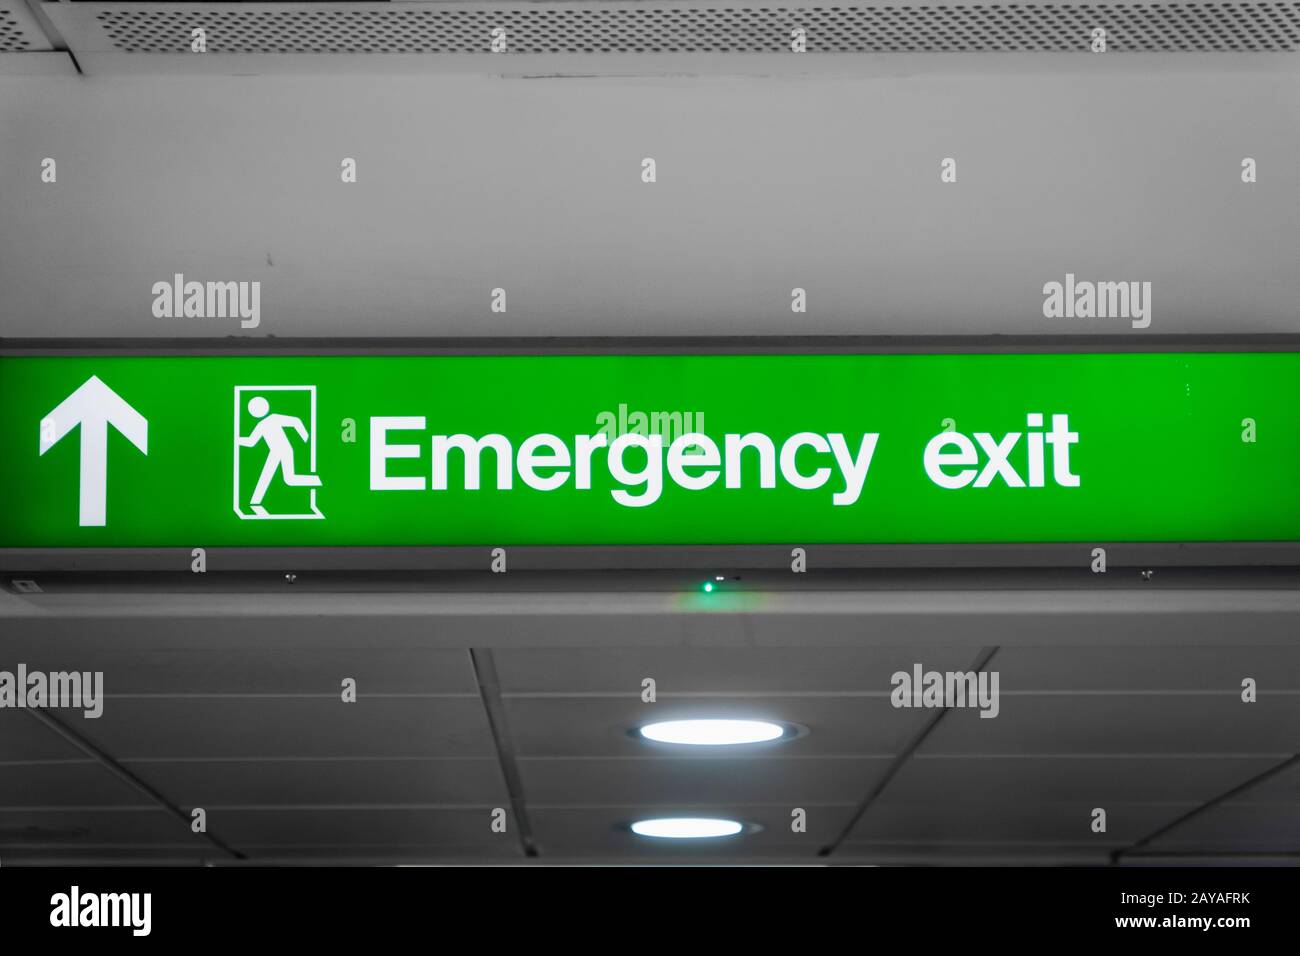 Emergency exit sign glowing green  in airport- for safety, fire drill, case of emergency Stock Photo